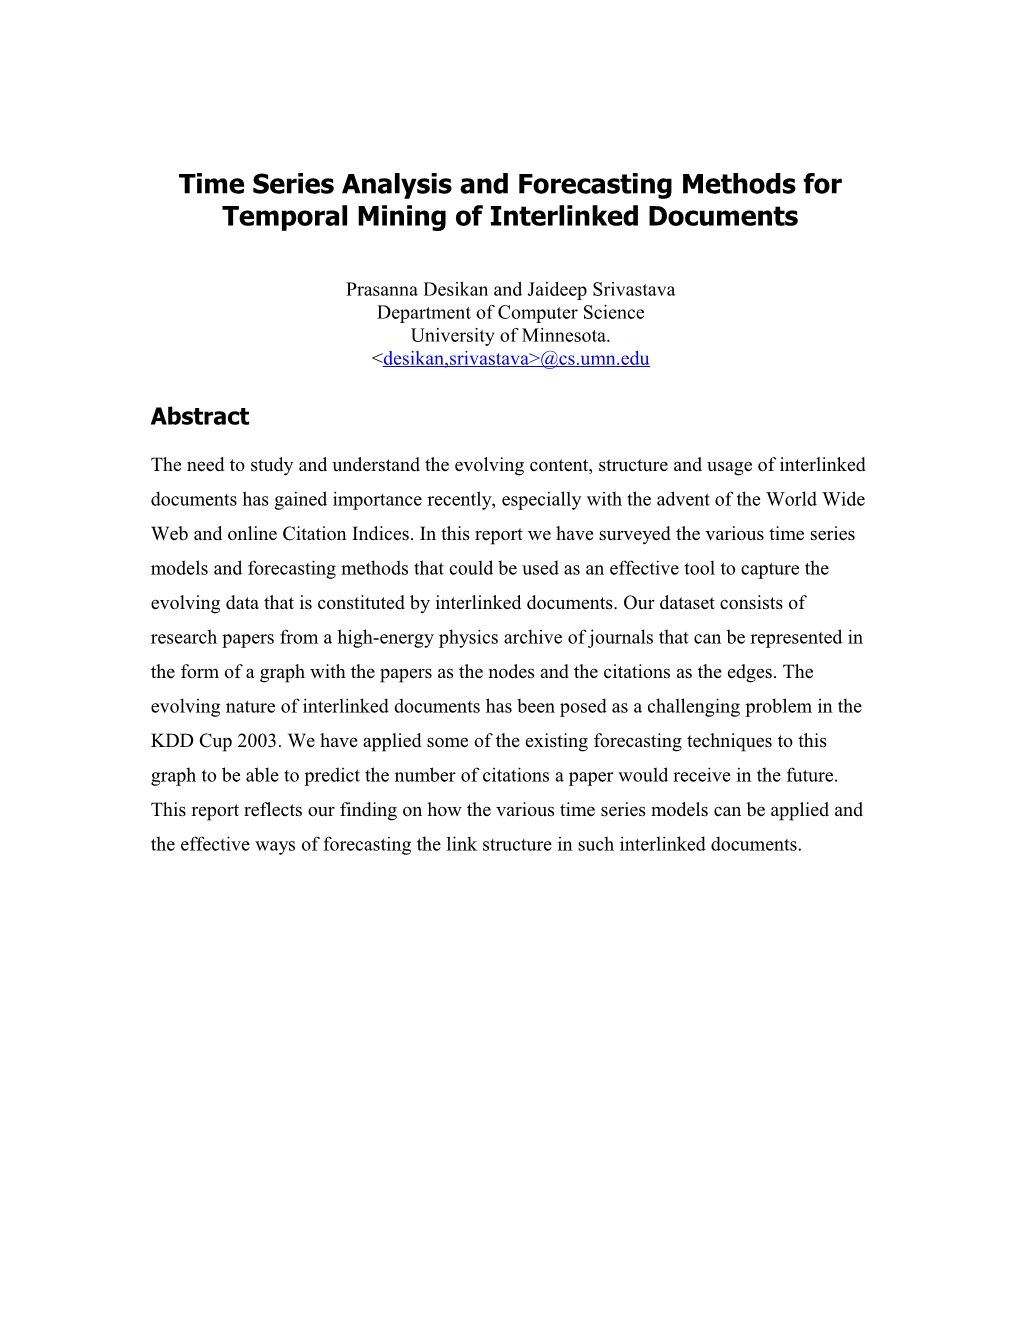 Application of Time Series Analysis and Forecasting for Temporal Web Mining